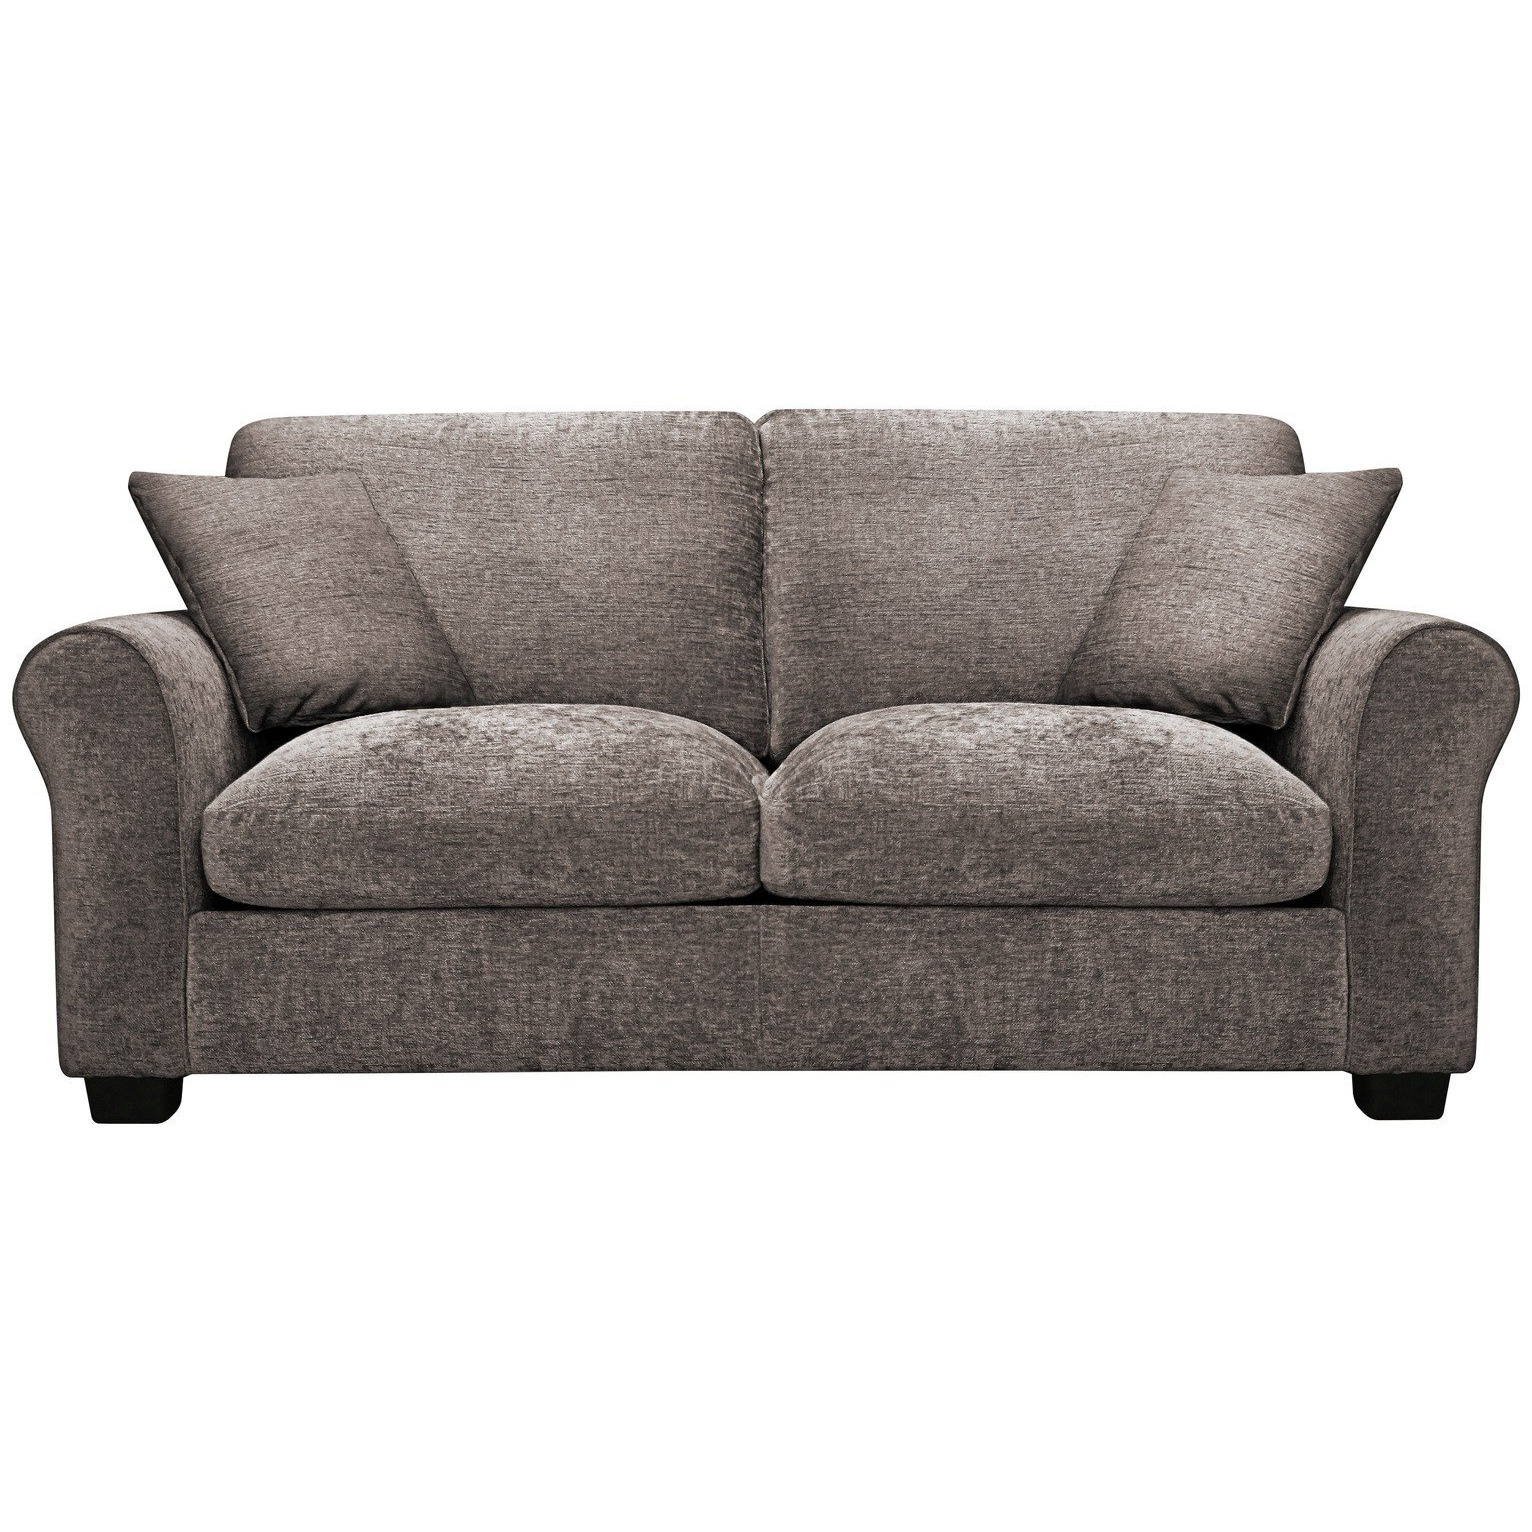 Argos Home Taylor Fabric Sofa Bed - Mink - image 1